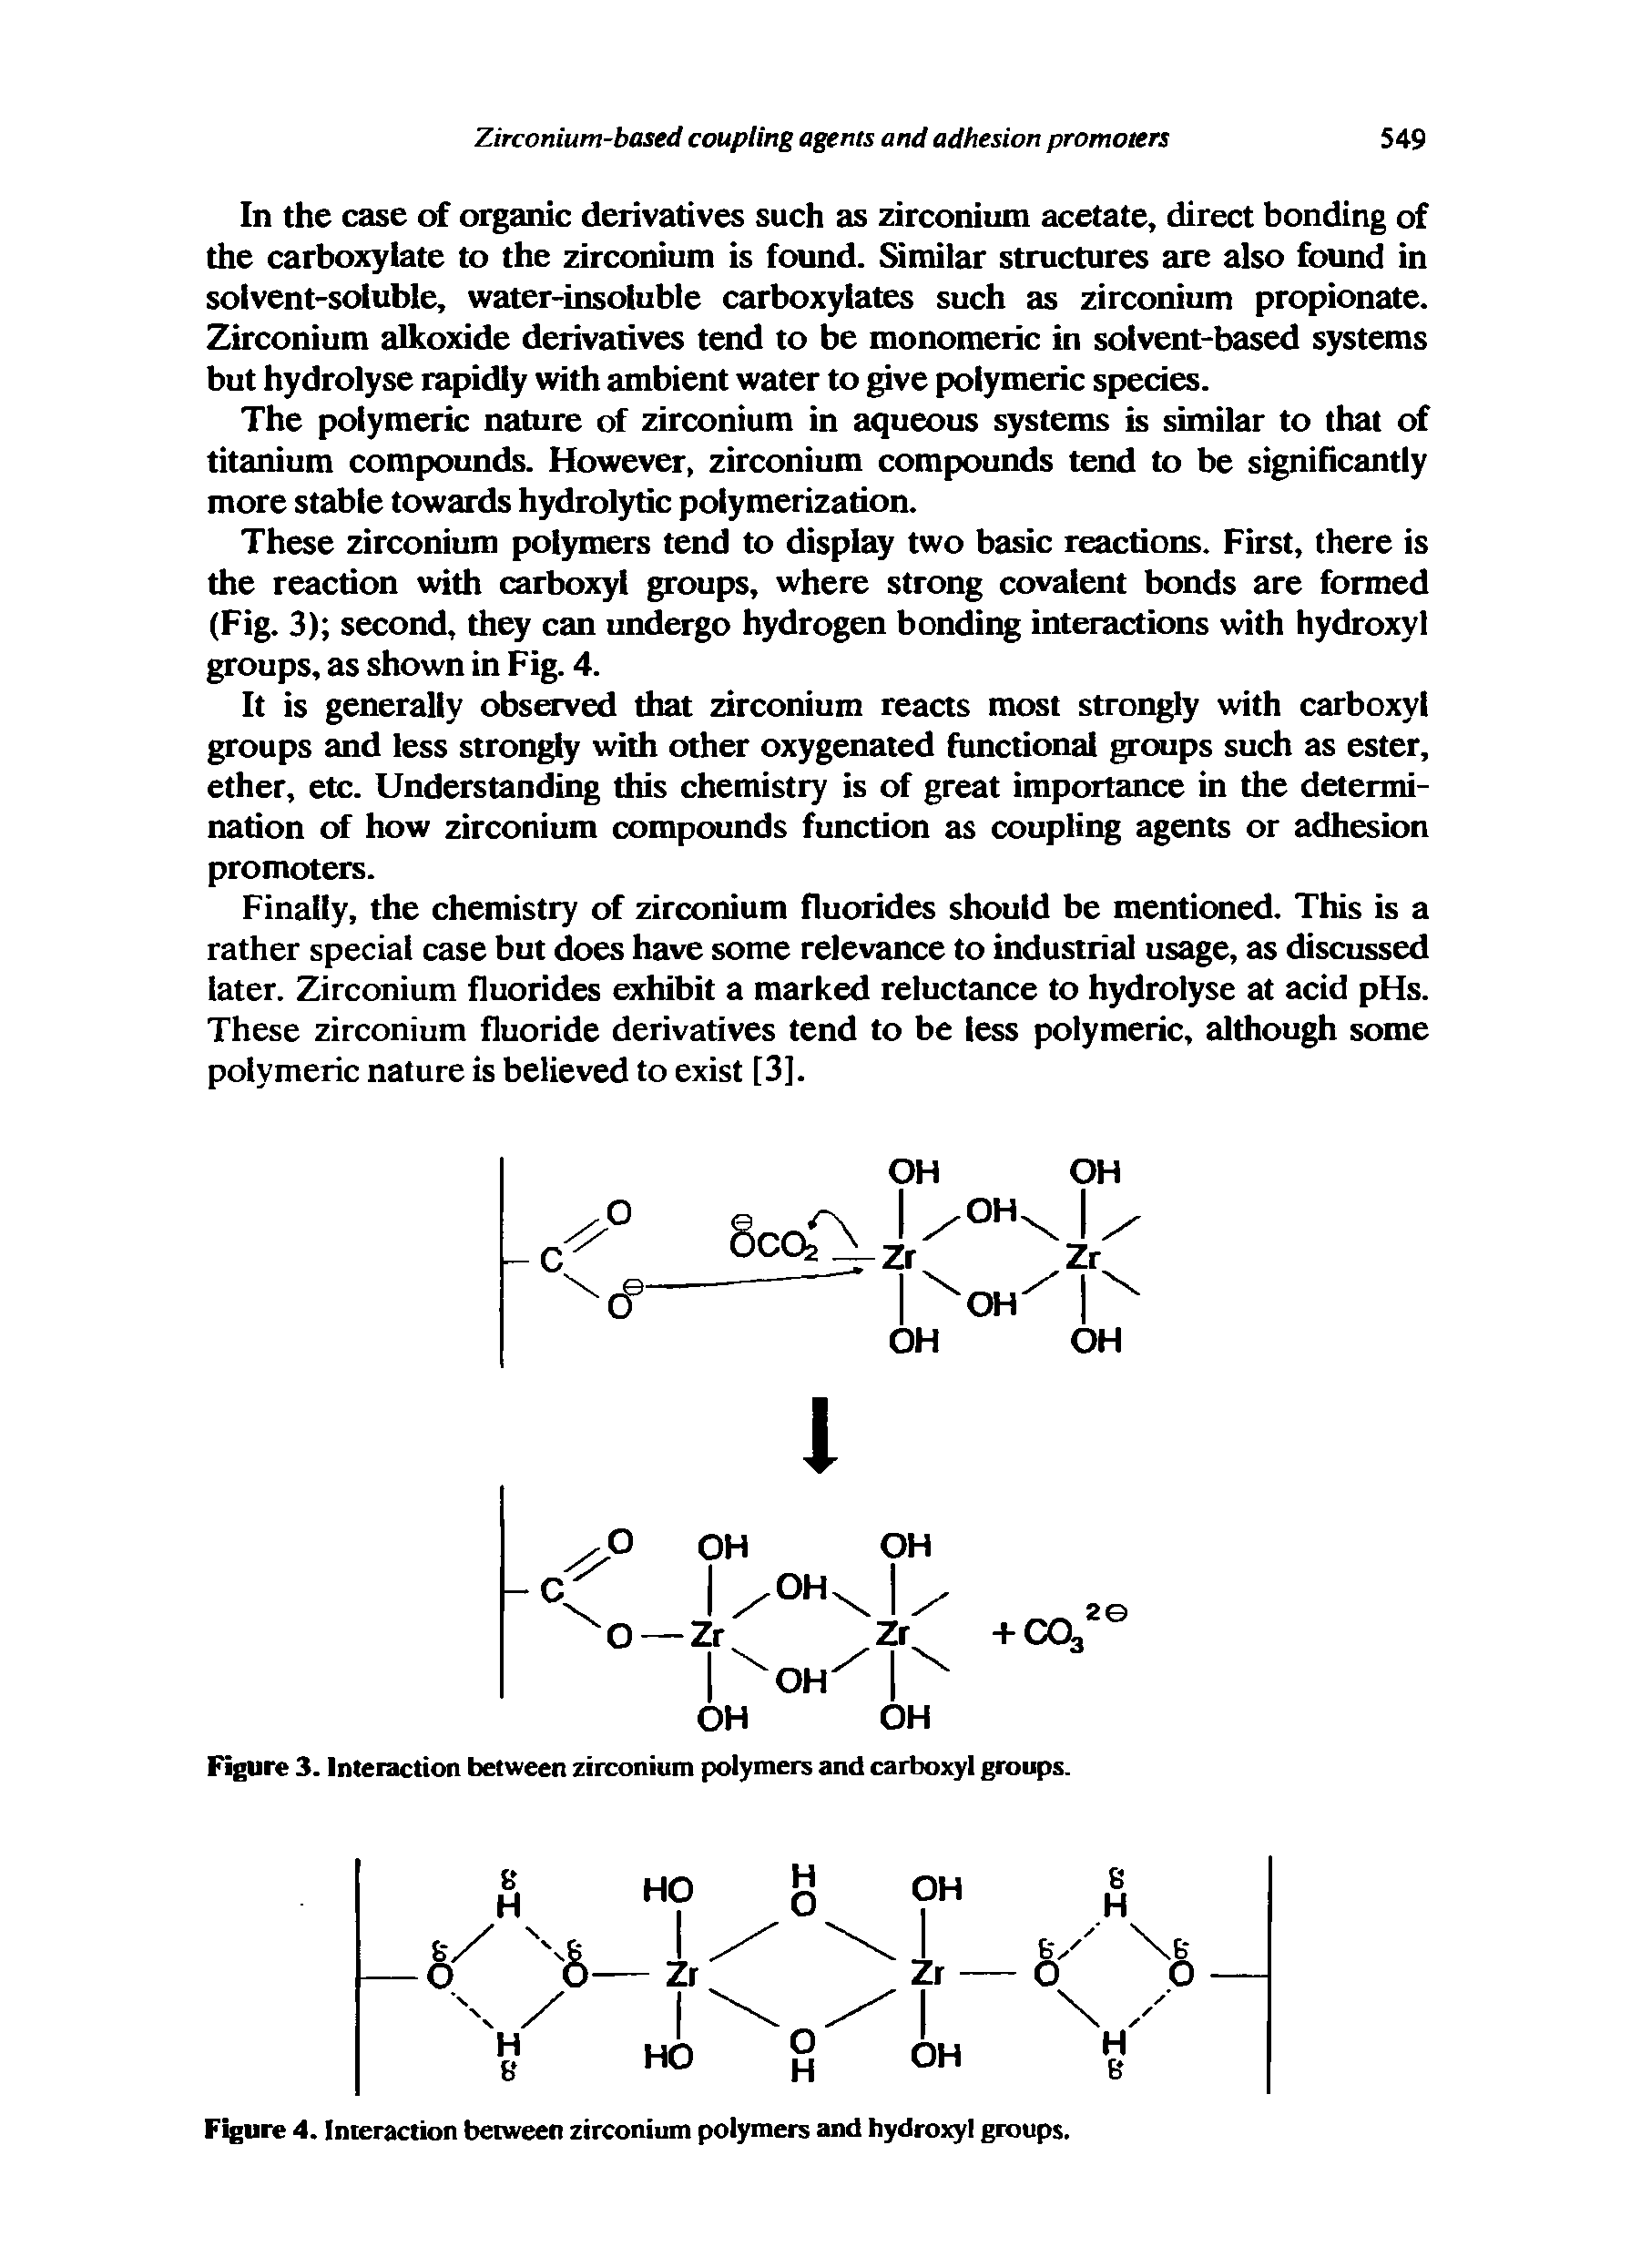 Figure 3. Interaction between zirconium polymers and carboxyl groups.